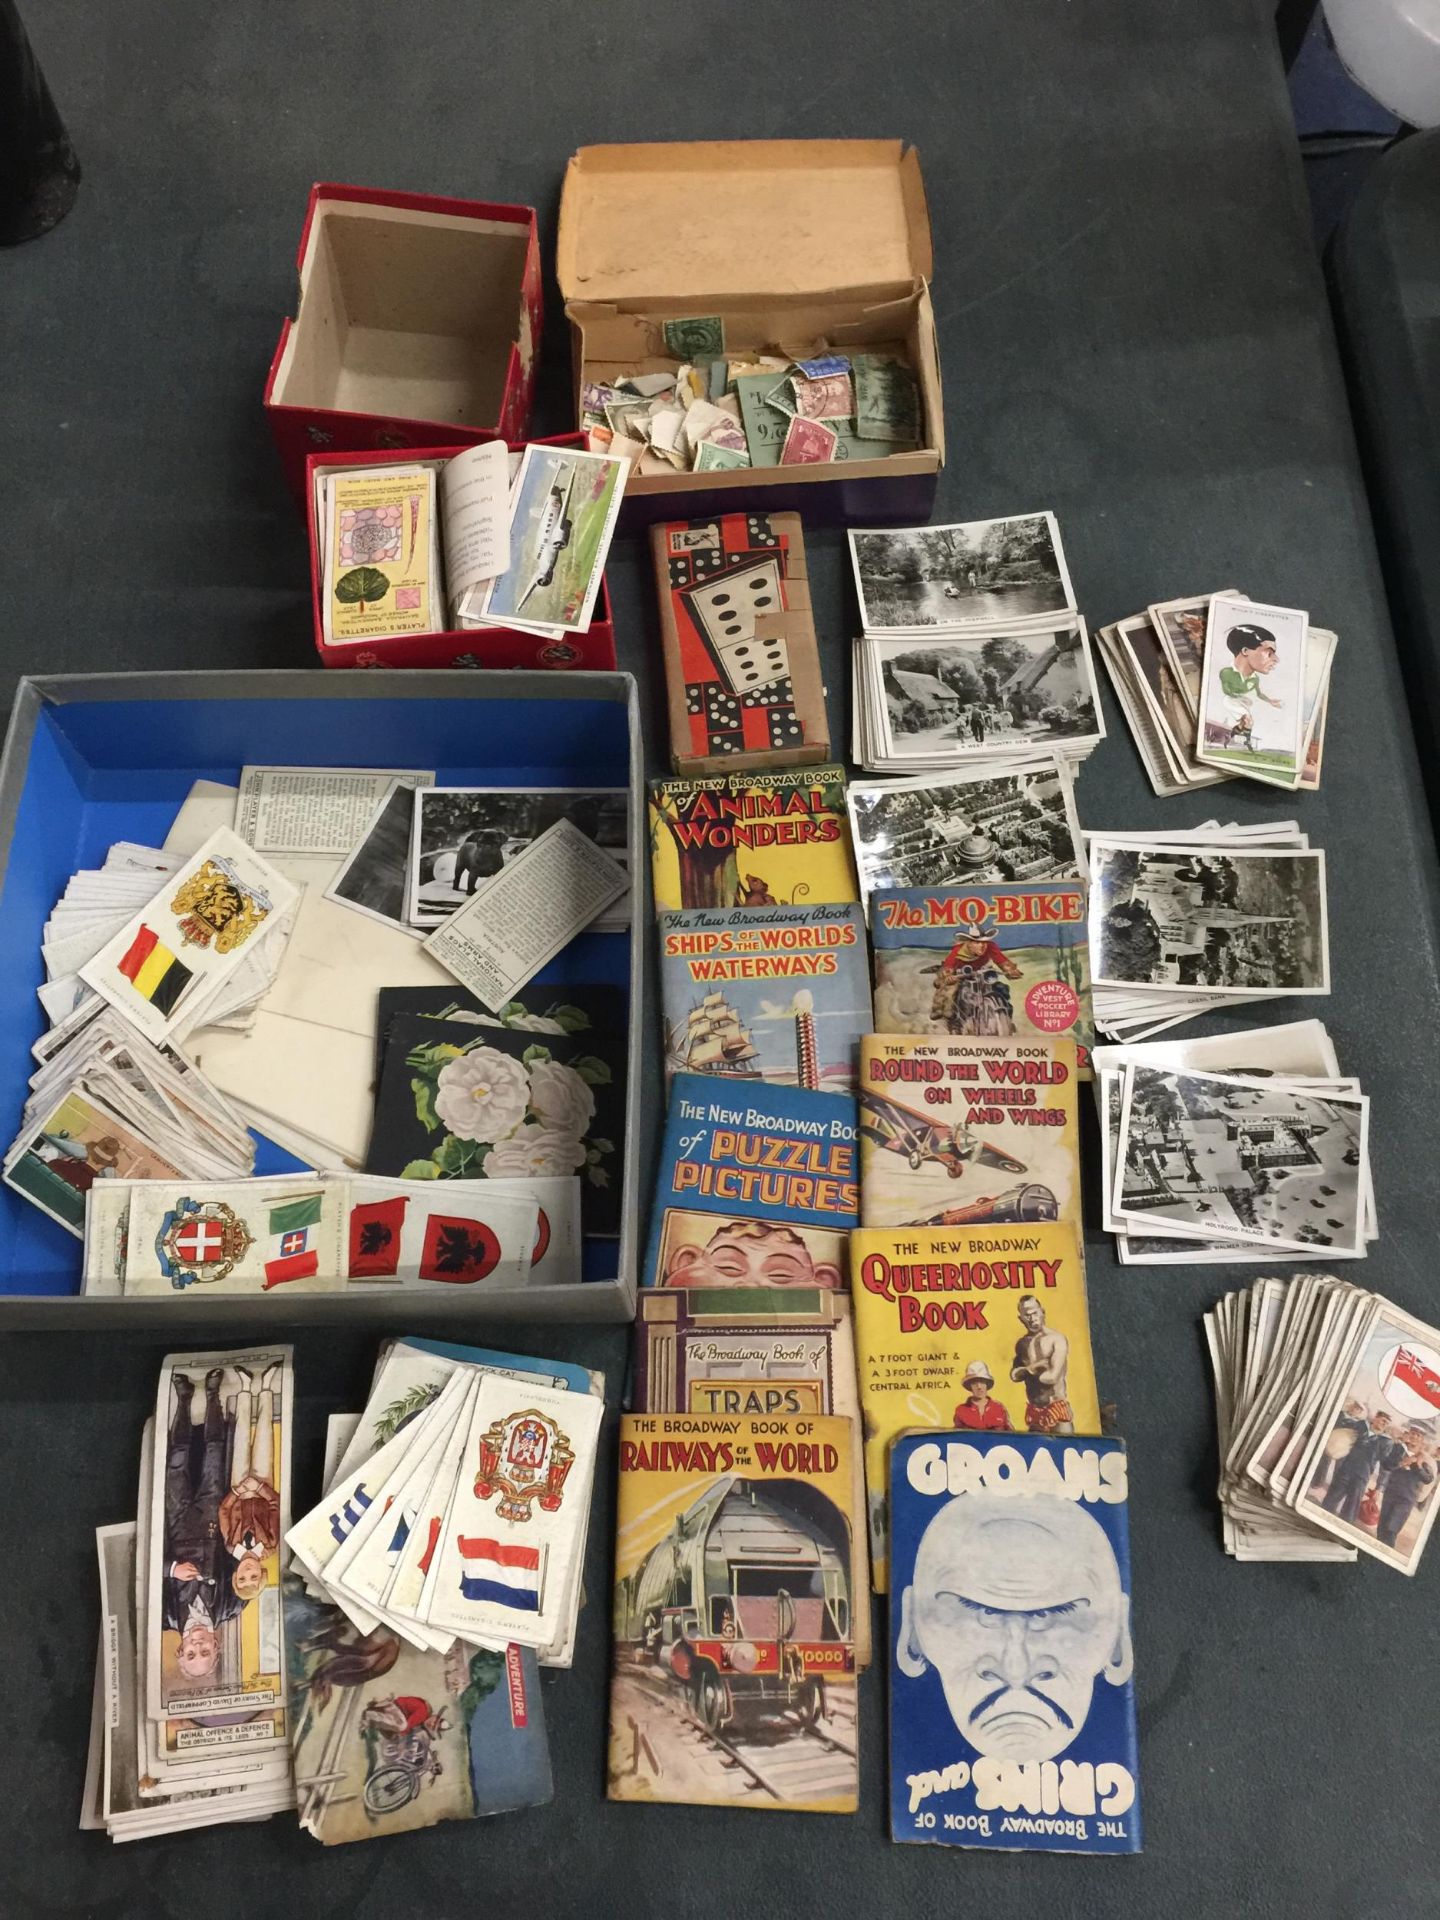 A COLLECTION OF VINTAGE BROADWAY BOOKS, CIGARETTE CARDS, LOOSE STAMPS ETC